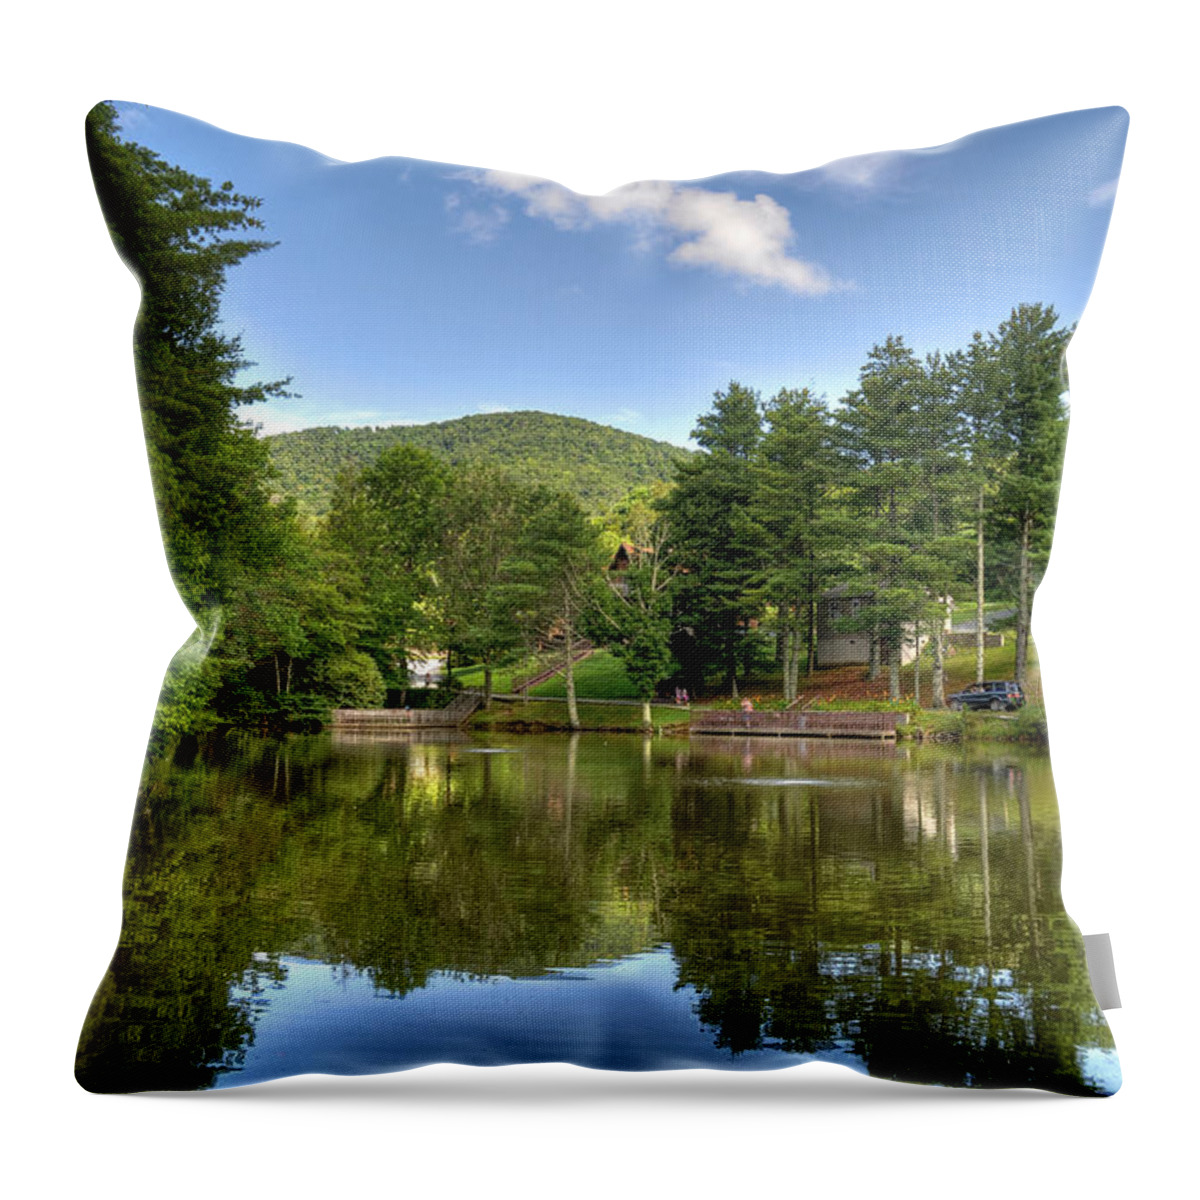 Swiss Throw Pillow featuring the photograph Swiss Mountain Lake by David Hart